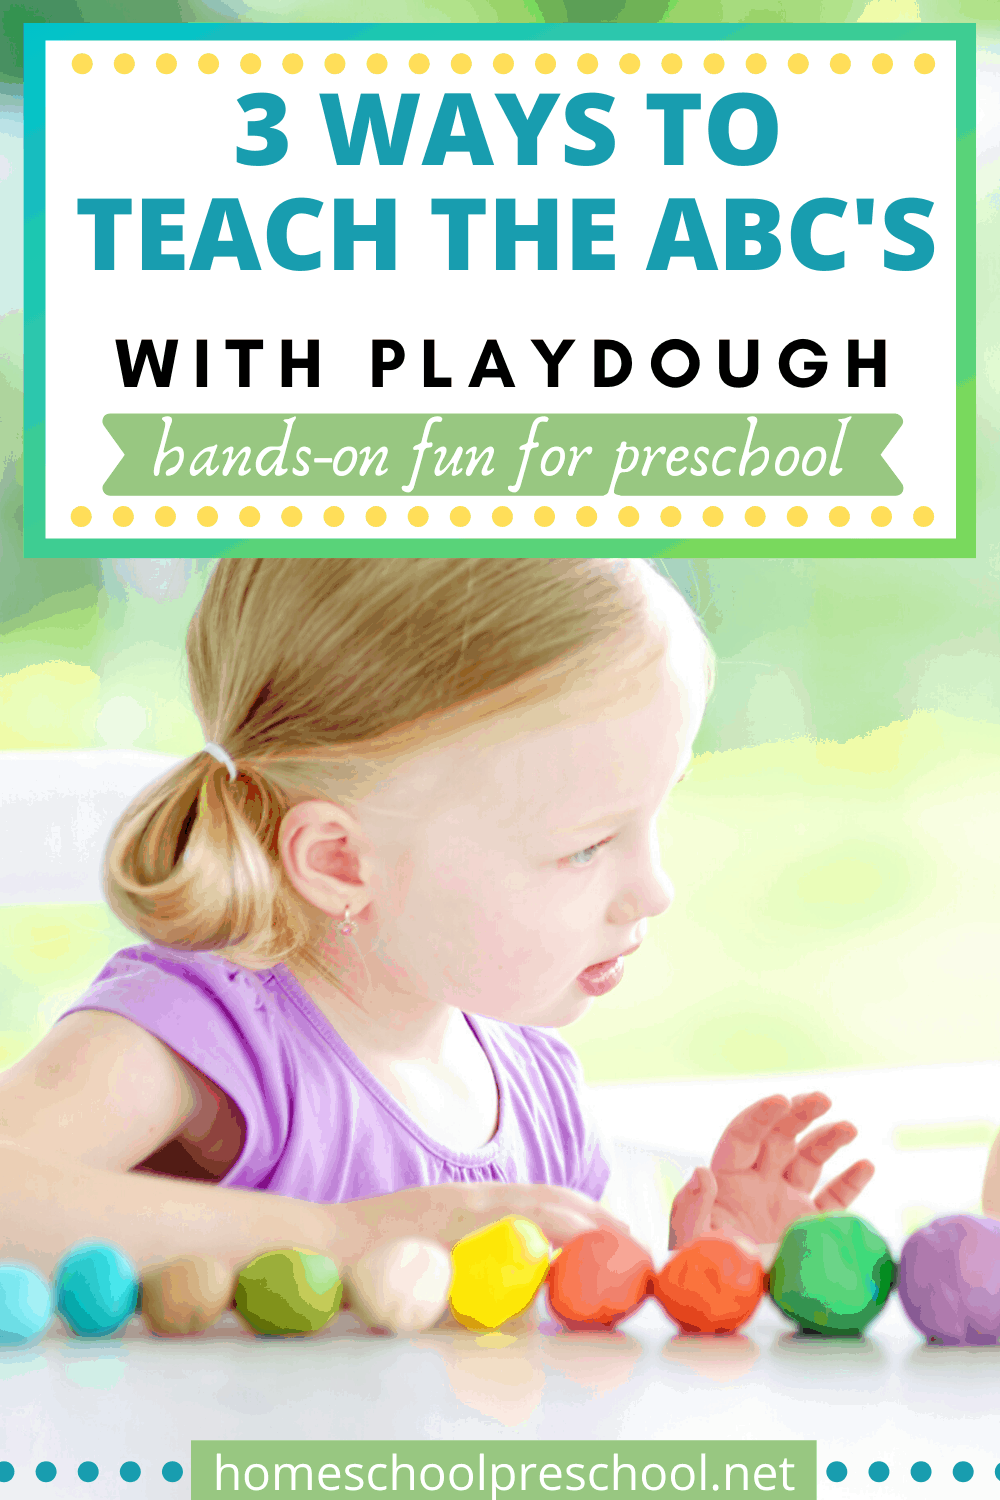 Preschoolers love to play with play dough. It's fun, it's squishy, and it's an excellent manipulative to have on hand when teaching the alphabet.